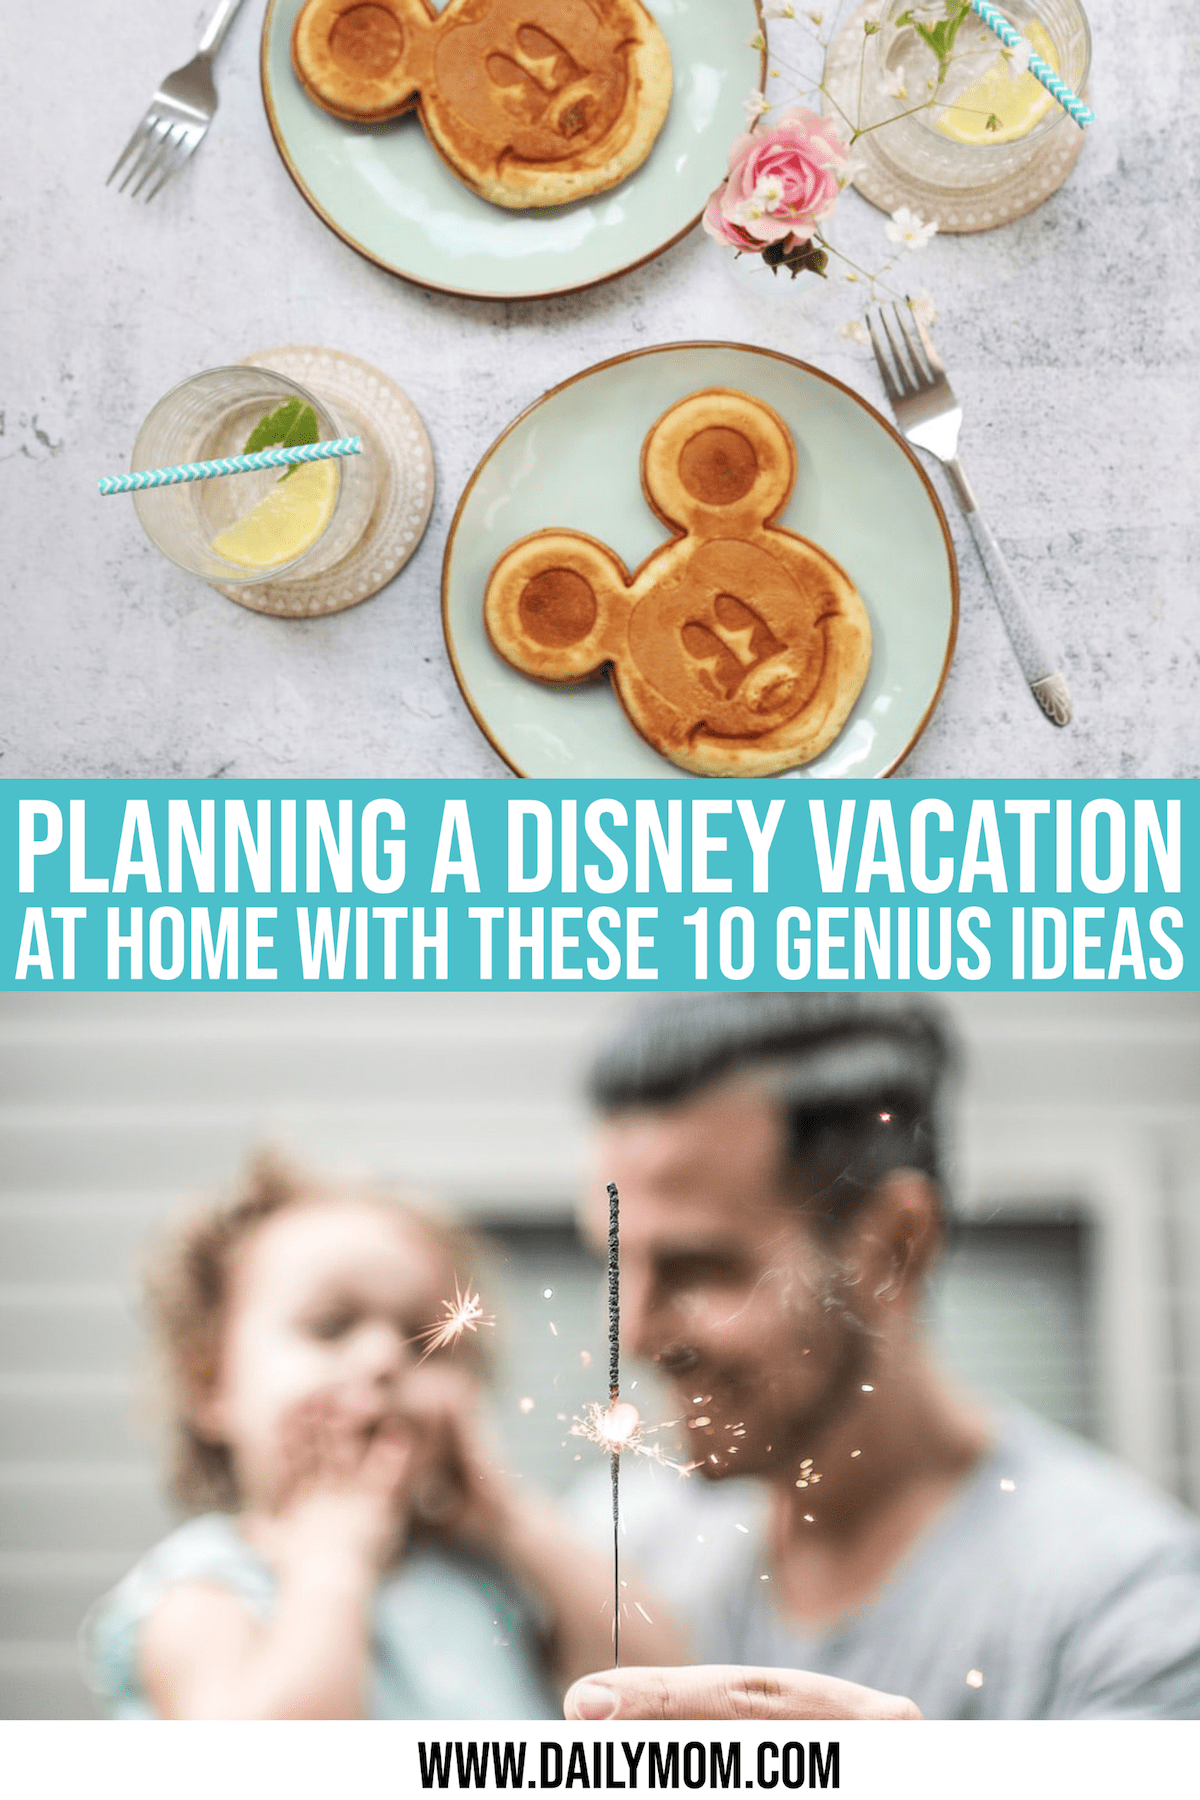 Planning A Disney Vacation At Home With These 10 Genius Ideas